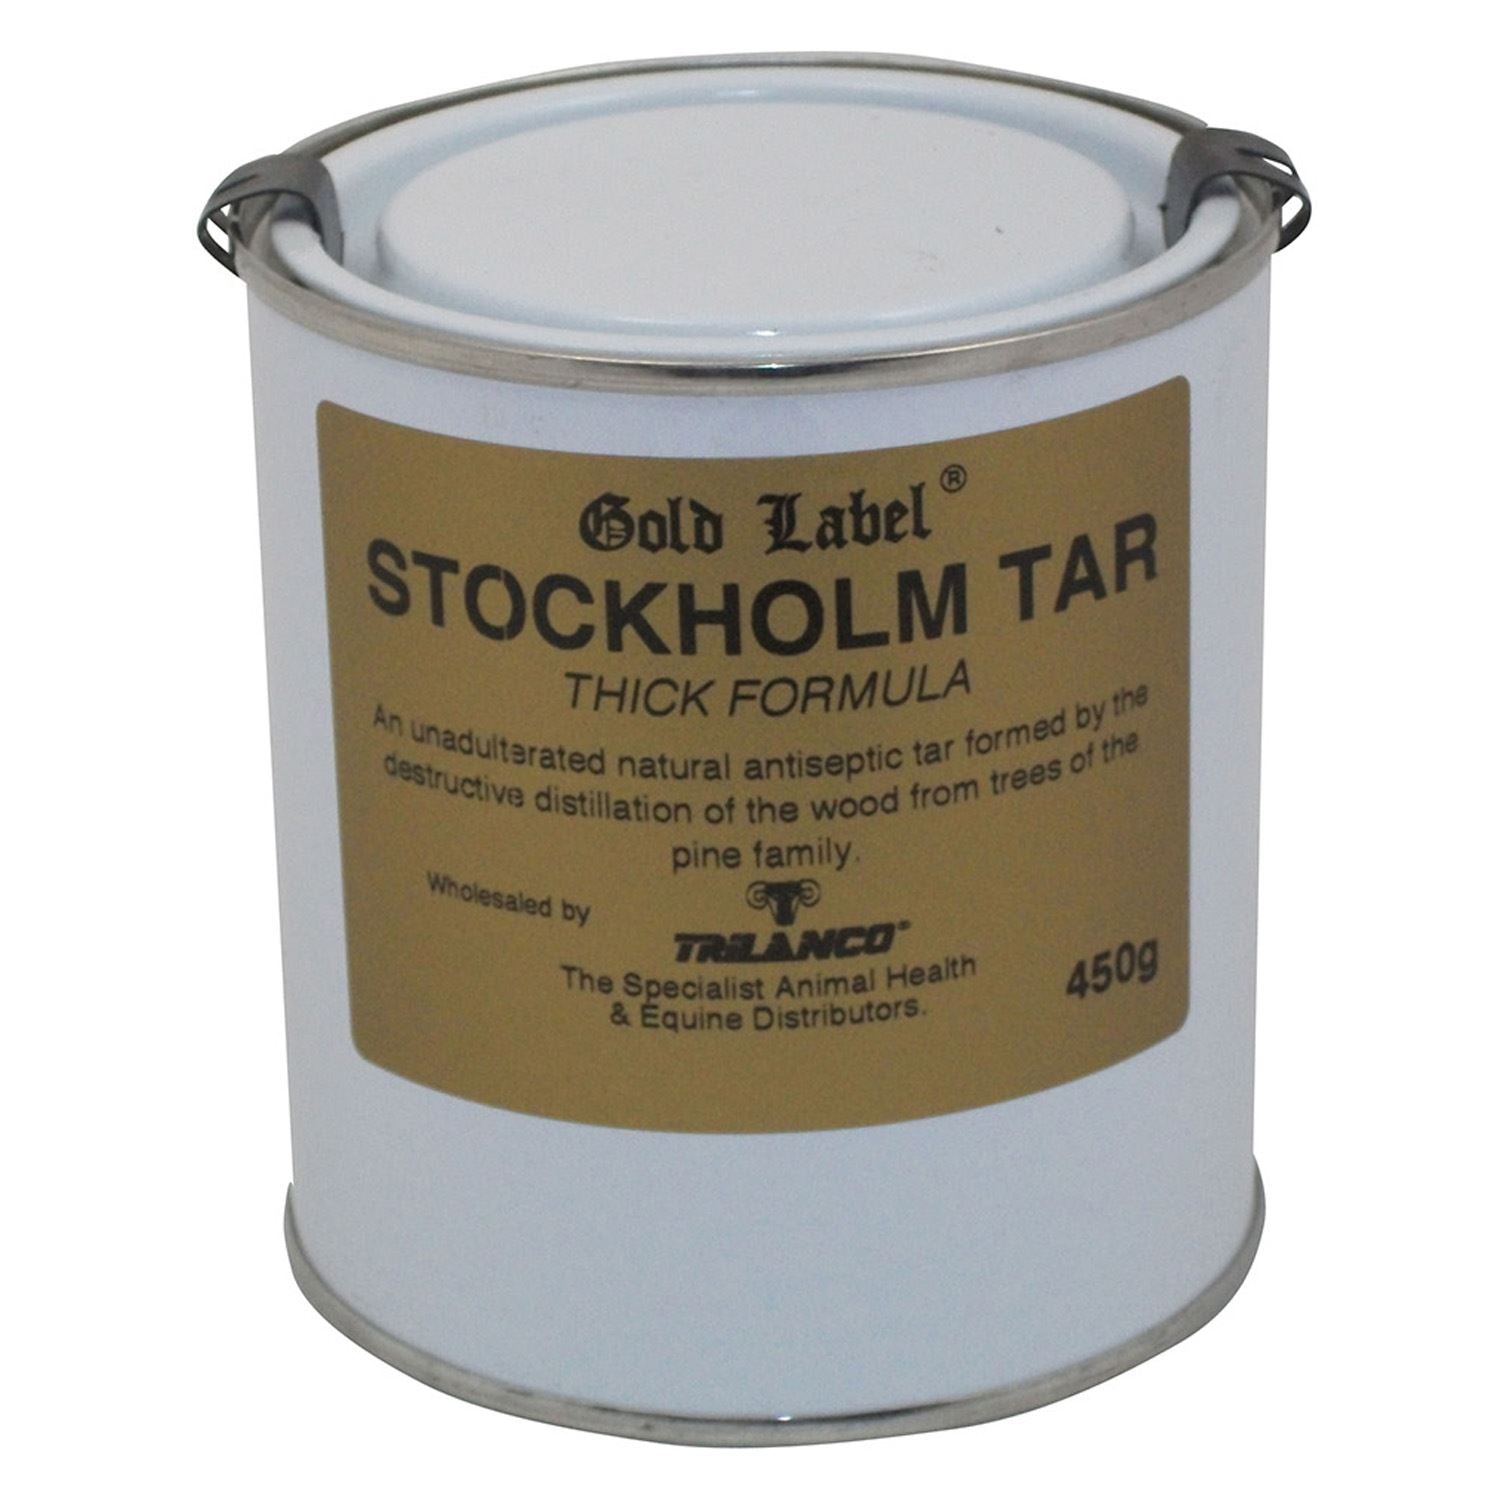 Gold Label Stockholm Tar Thick - Just Horse Riders